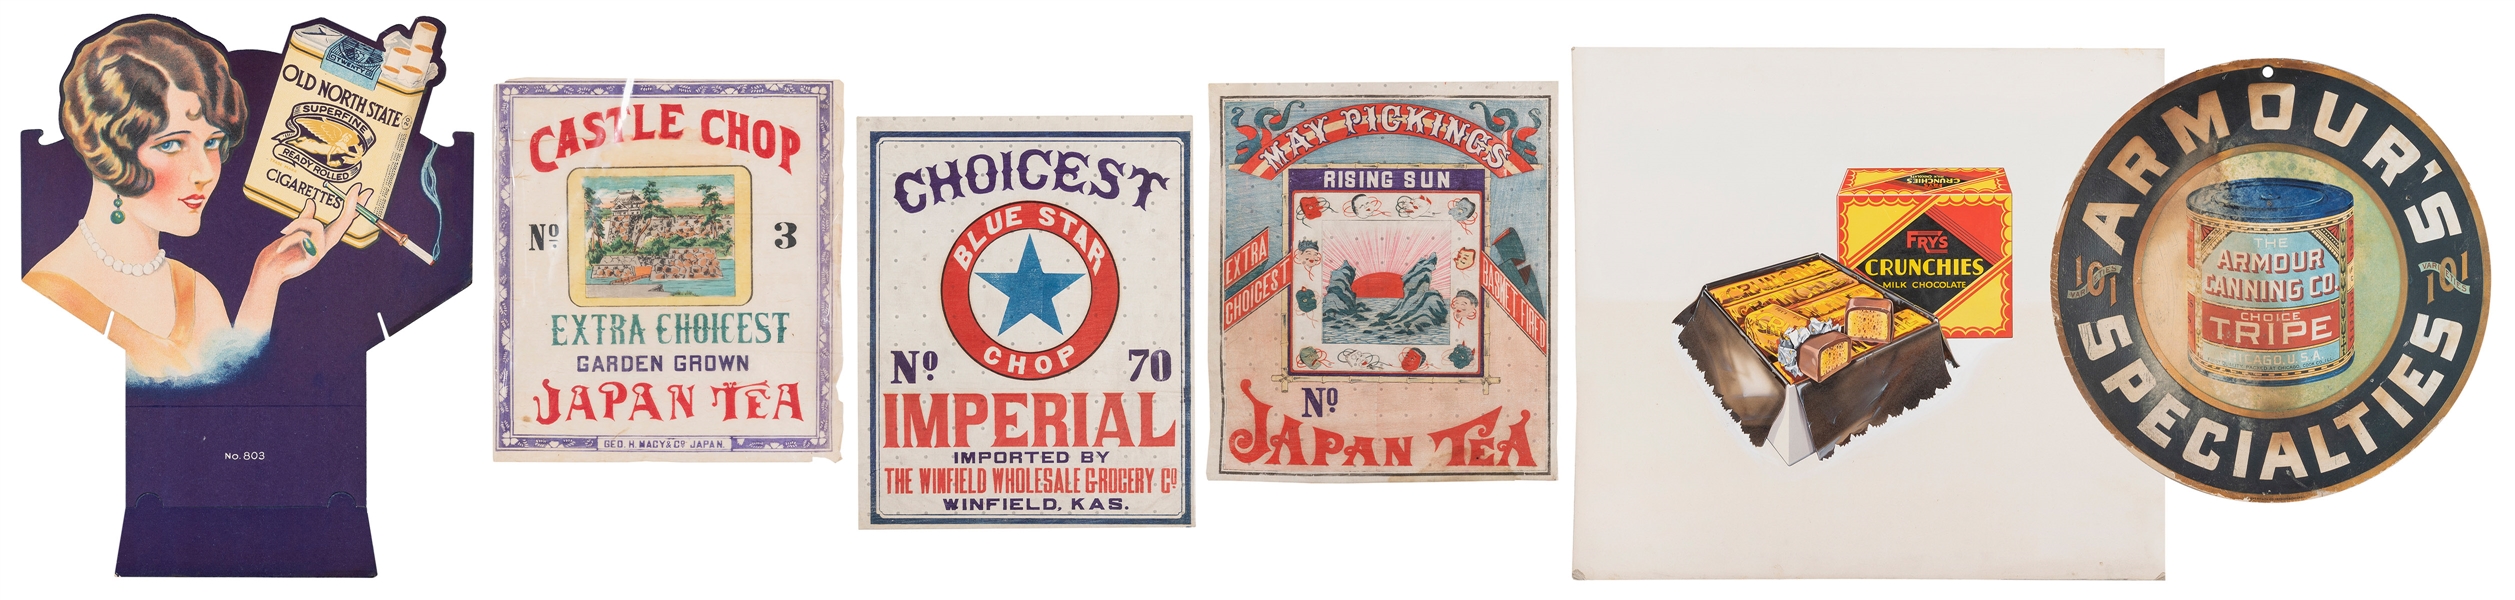  Collection of 7 Antique Advertisements. Includes advertisem...